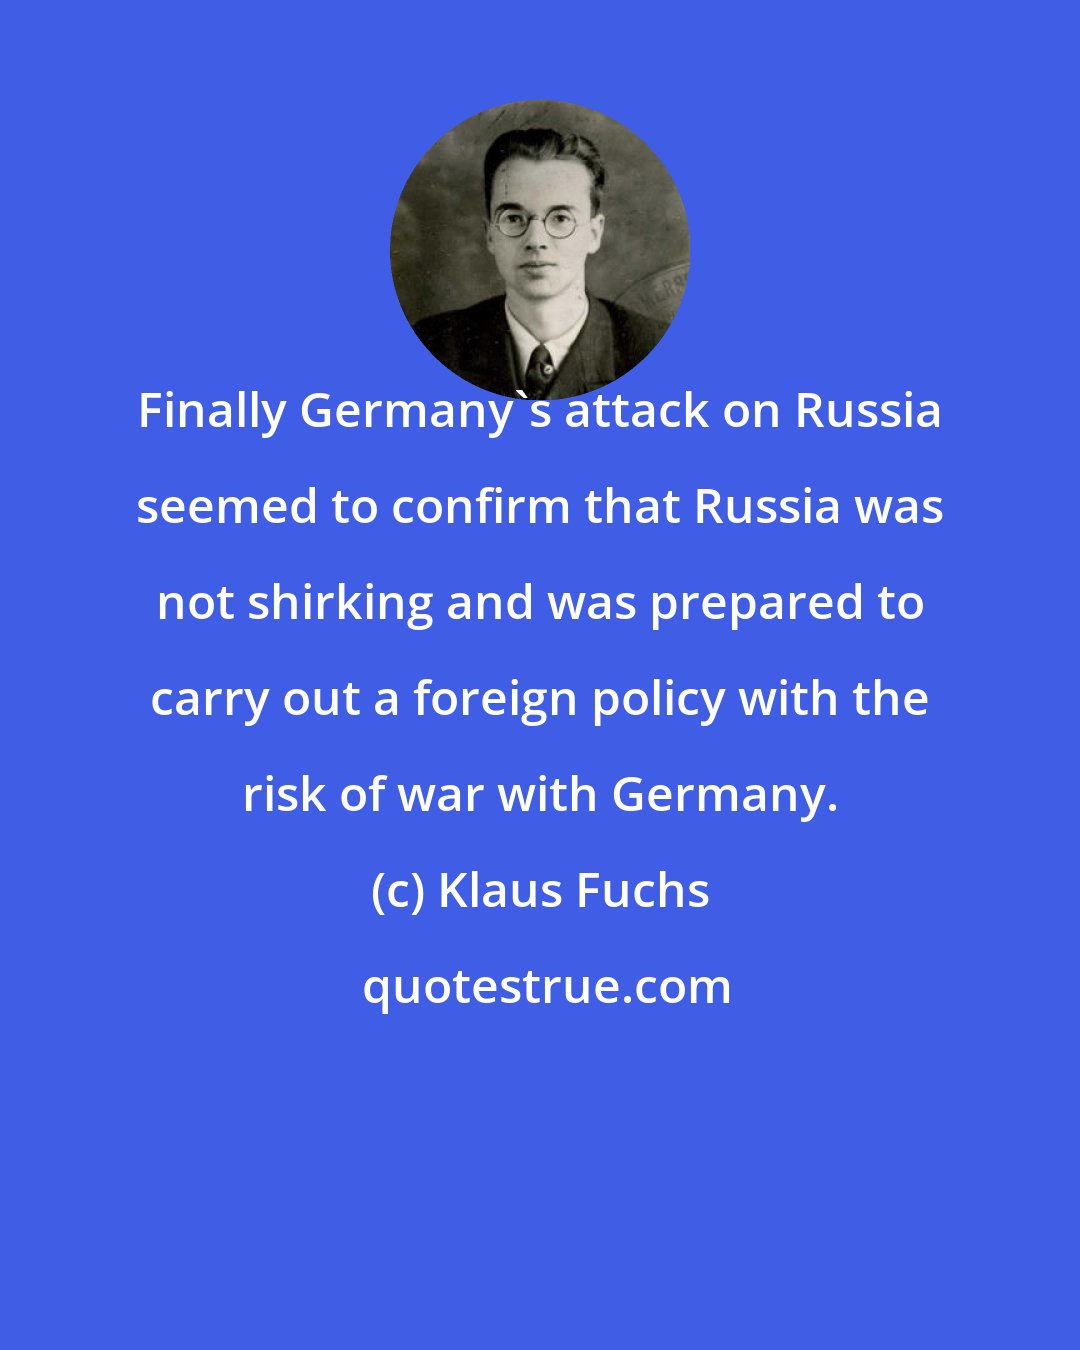 Klaus Fuchs: Finally Germany's attack on Russia seemed to confirm that Russia was not shirking and was prepared to carry out a foreign policy with the risk of war with Germany.